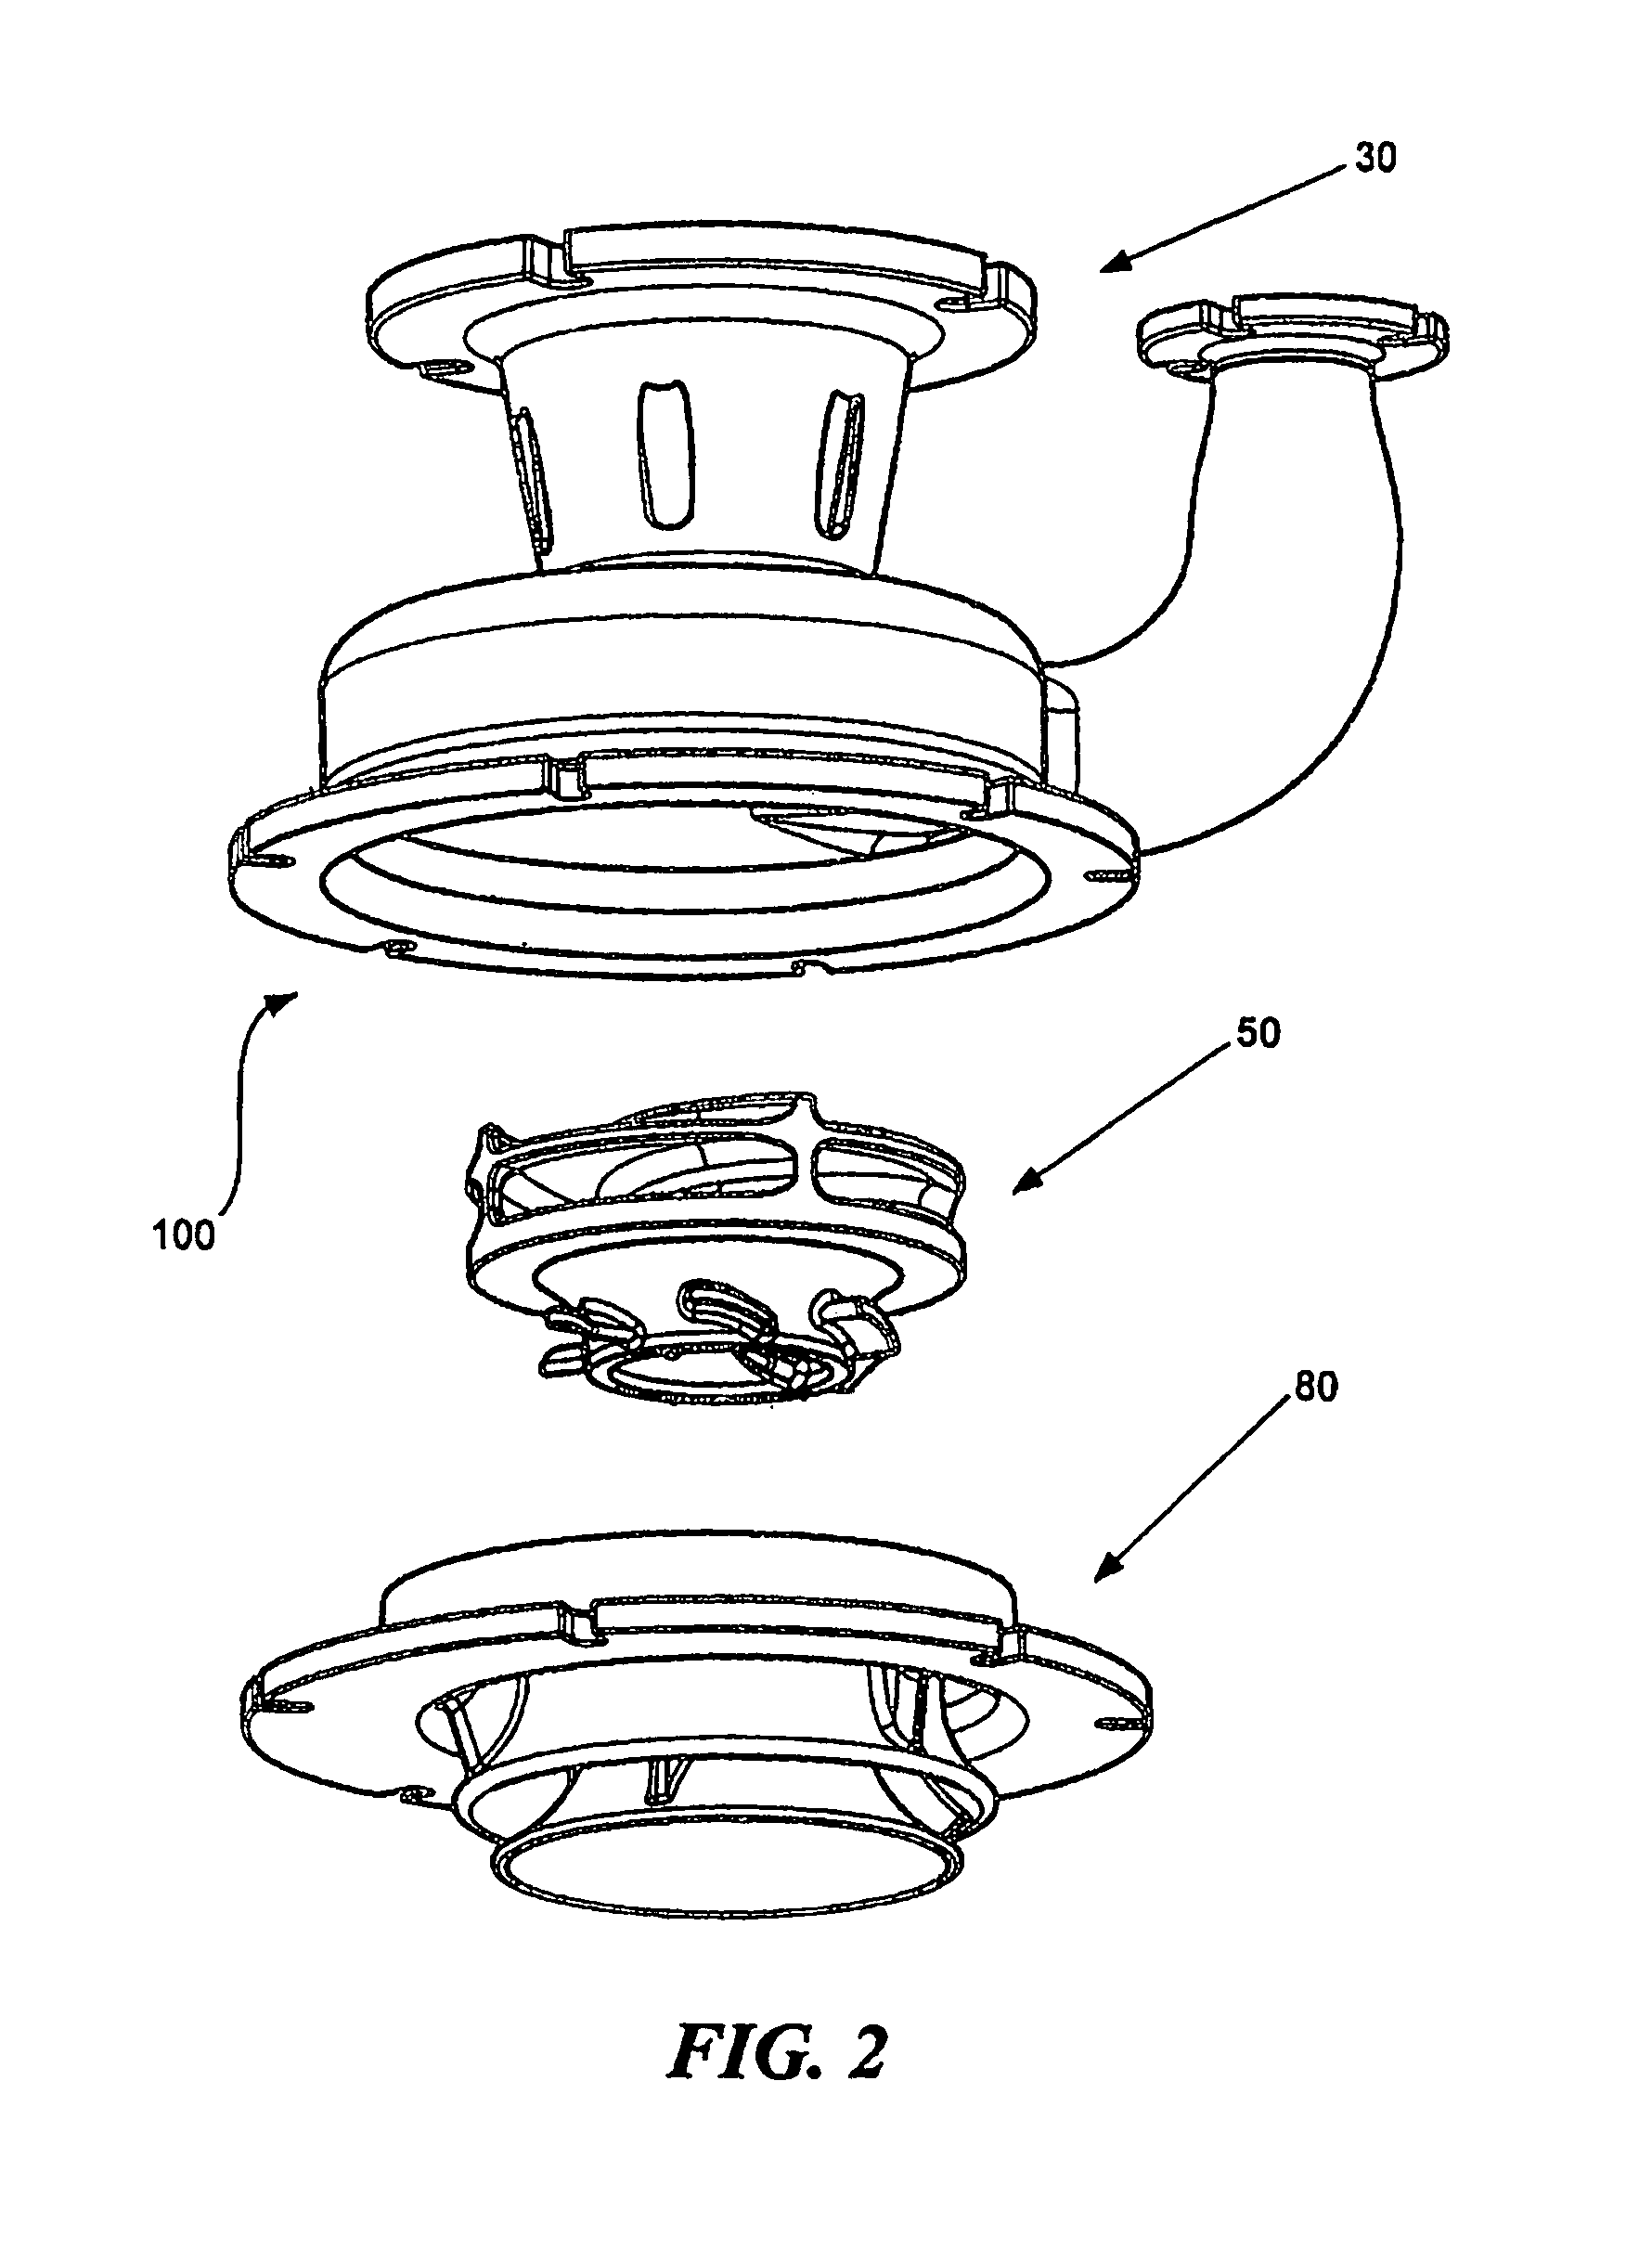 Slurry pump having impeller flow elements and a flow directing device